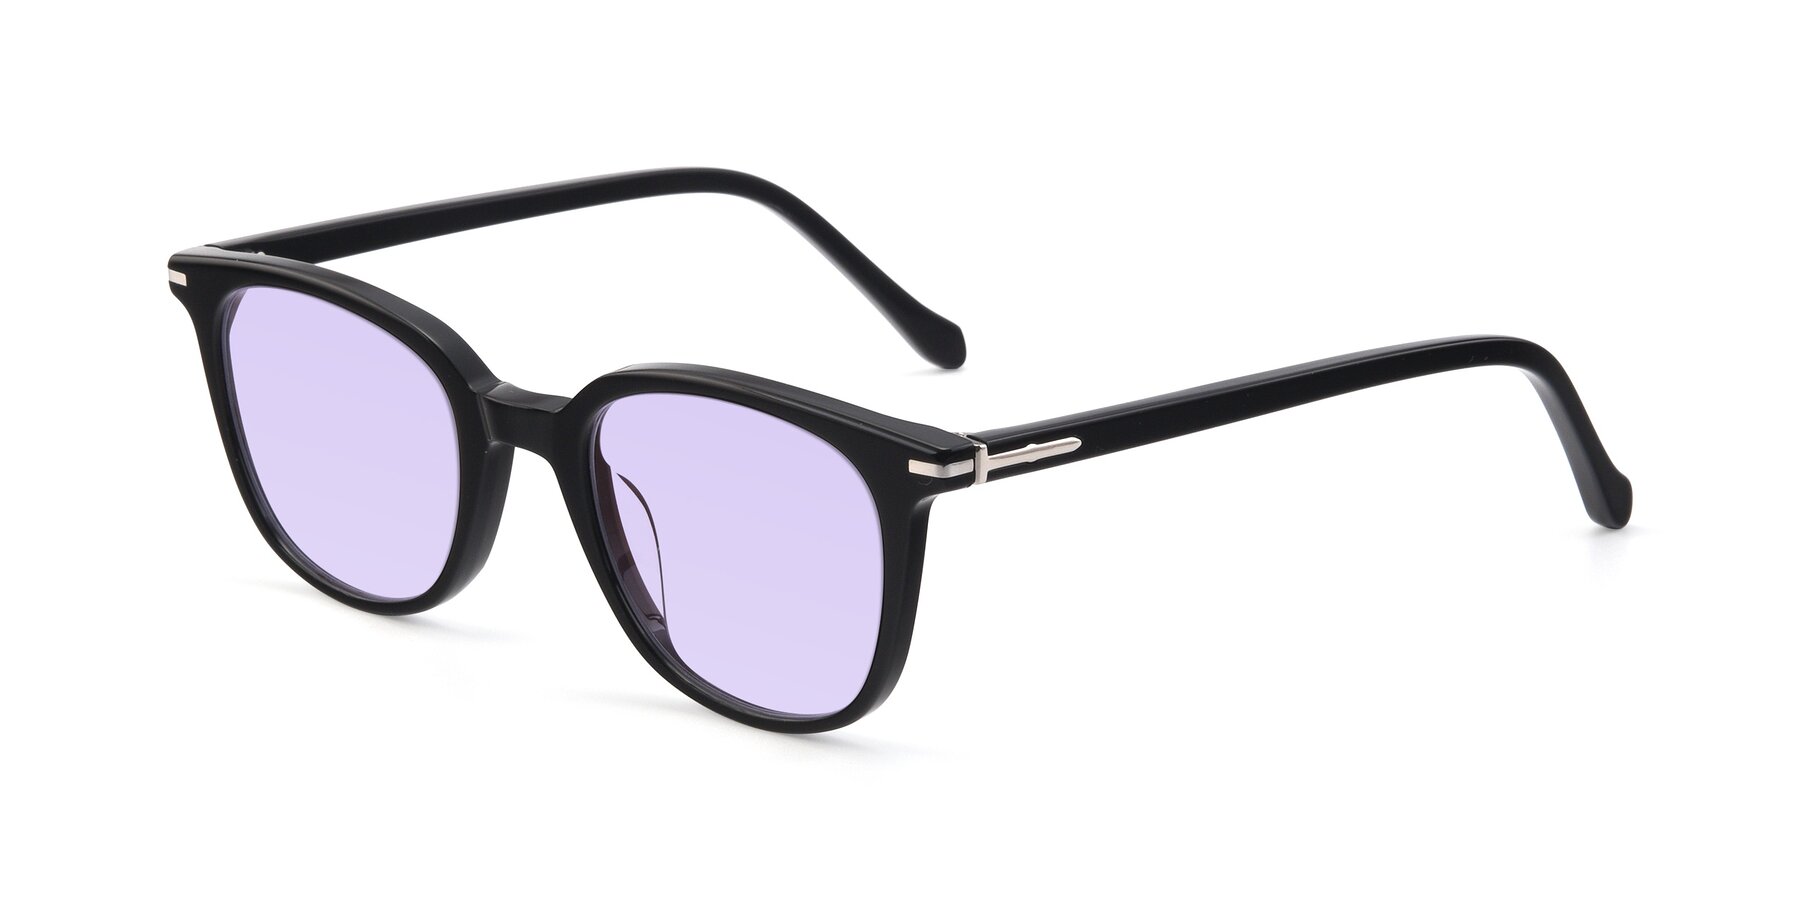 Angle of 17562 in Black with Light Purple Tinted Lenses